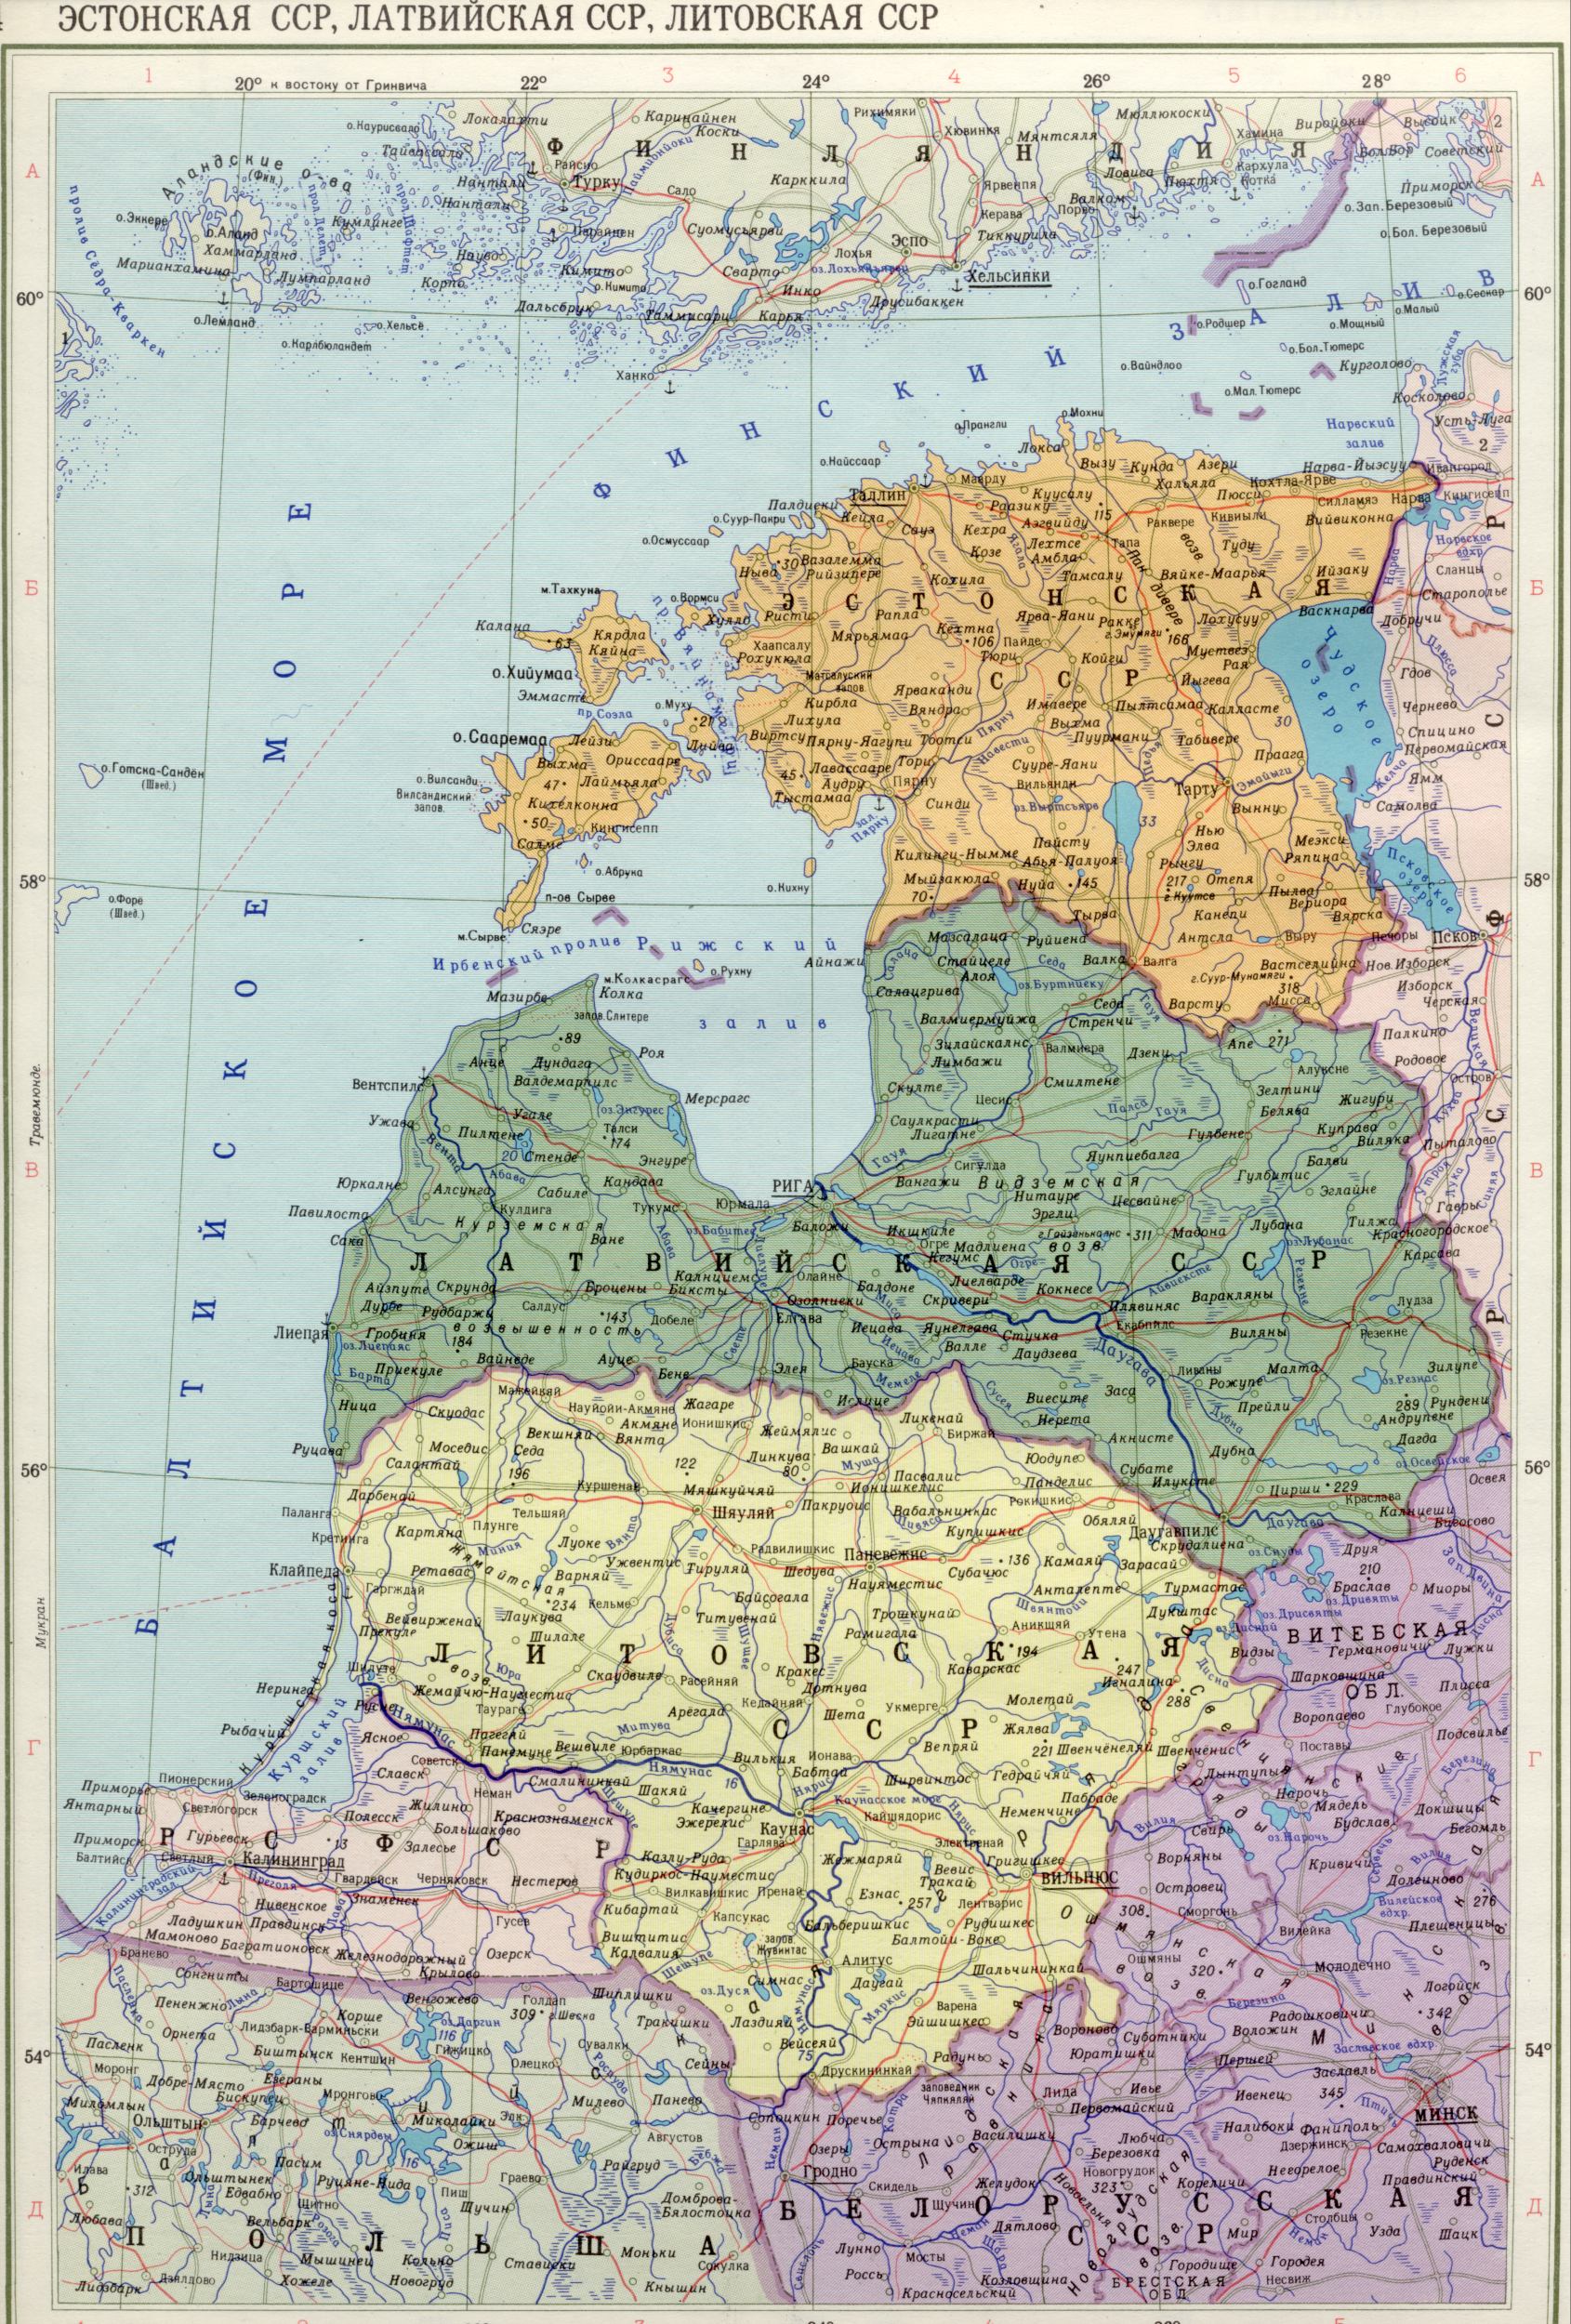 Map of the Baltic States, the Kaliningrad region in 1988 1cm = 30km. Download free political map of Europe